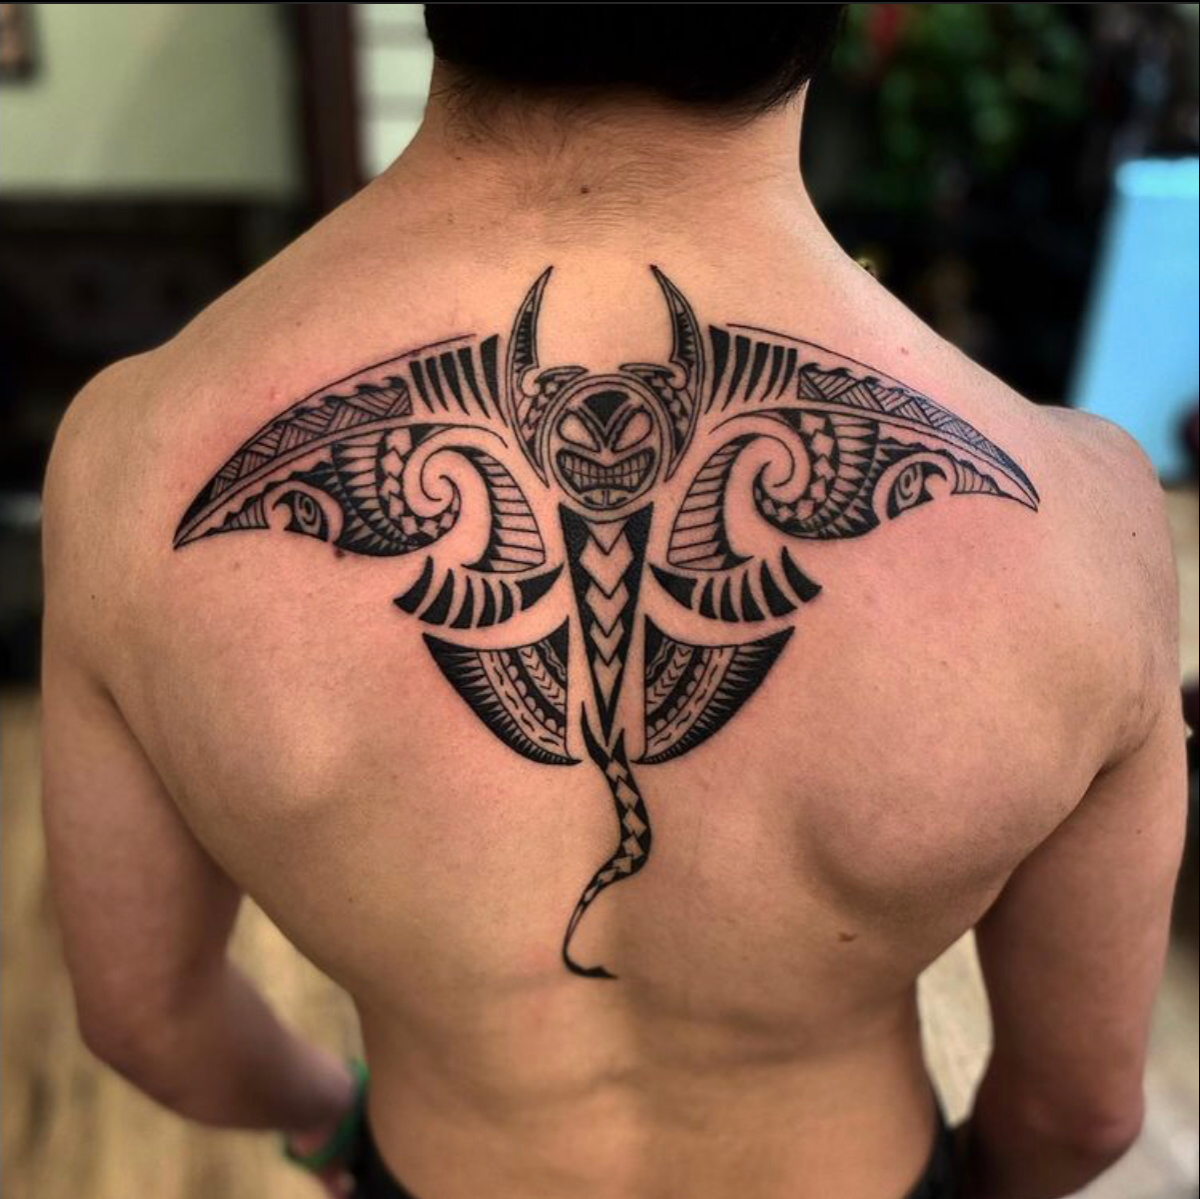 Tattooscom  Owl from Youtube video Eagle Owl Landing in Slow Motion  incredible look it up Tattoo by Darren ThéDude Rosa of Rising Dragon  Tattoos NYC  Facebook